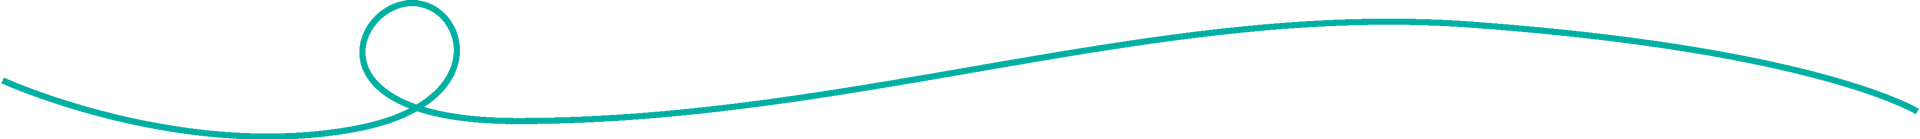 A swirly teal green divider line